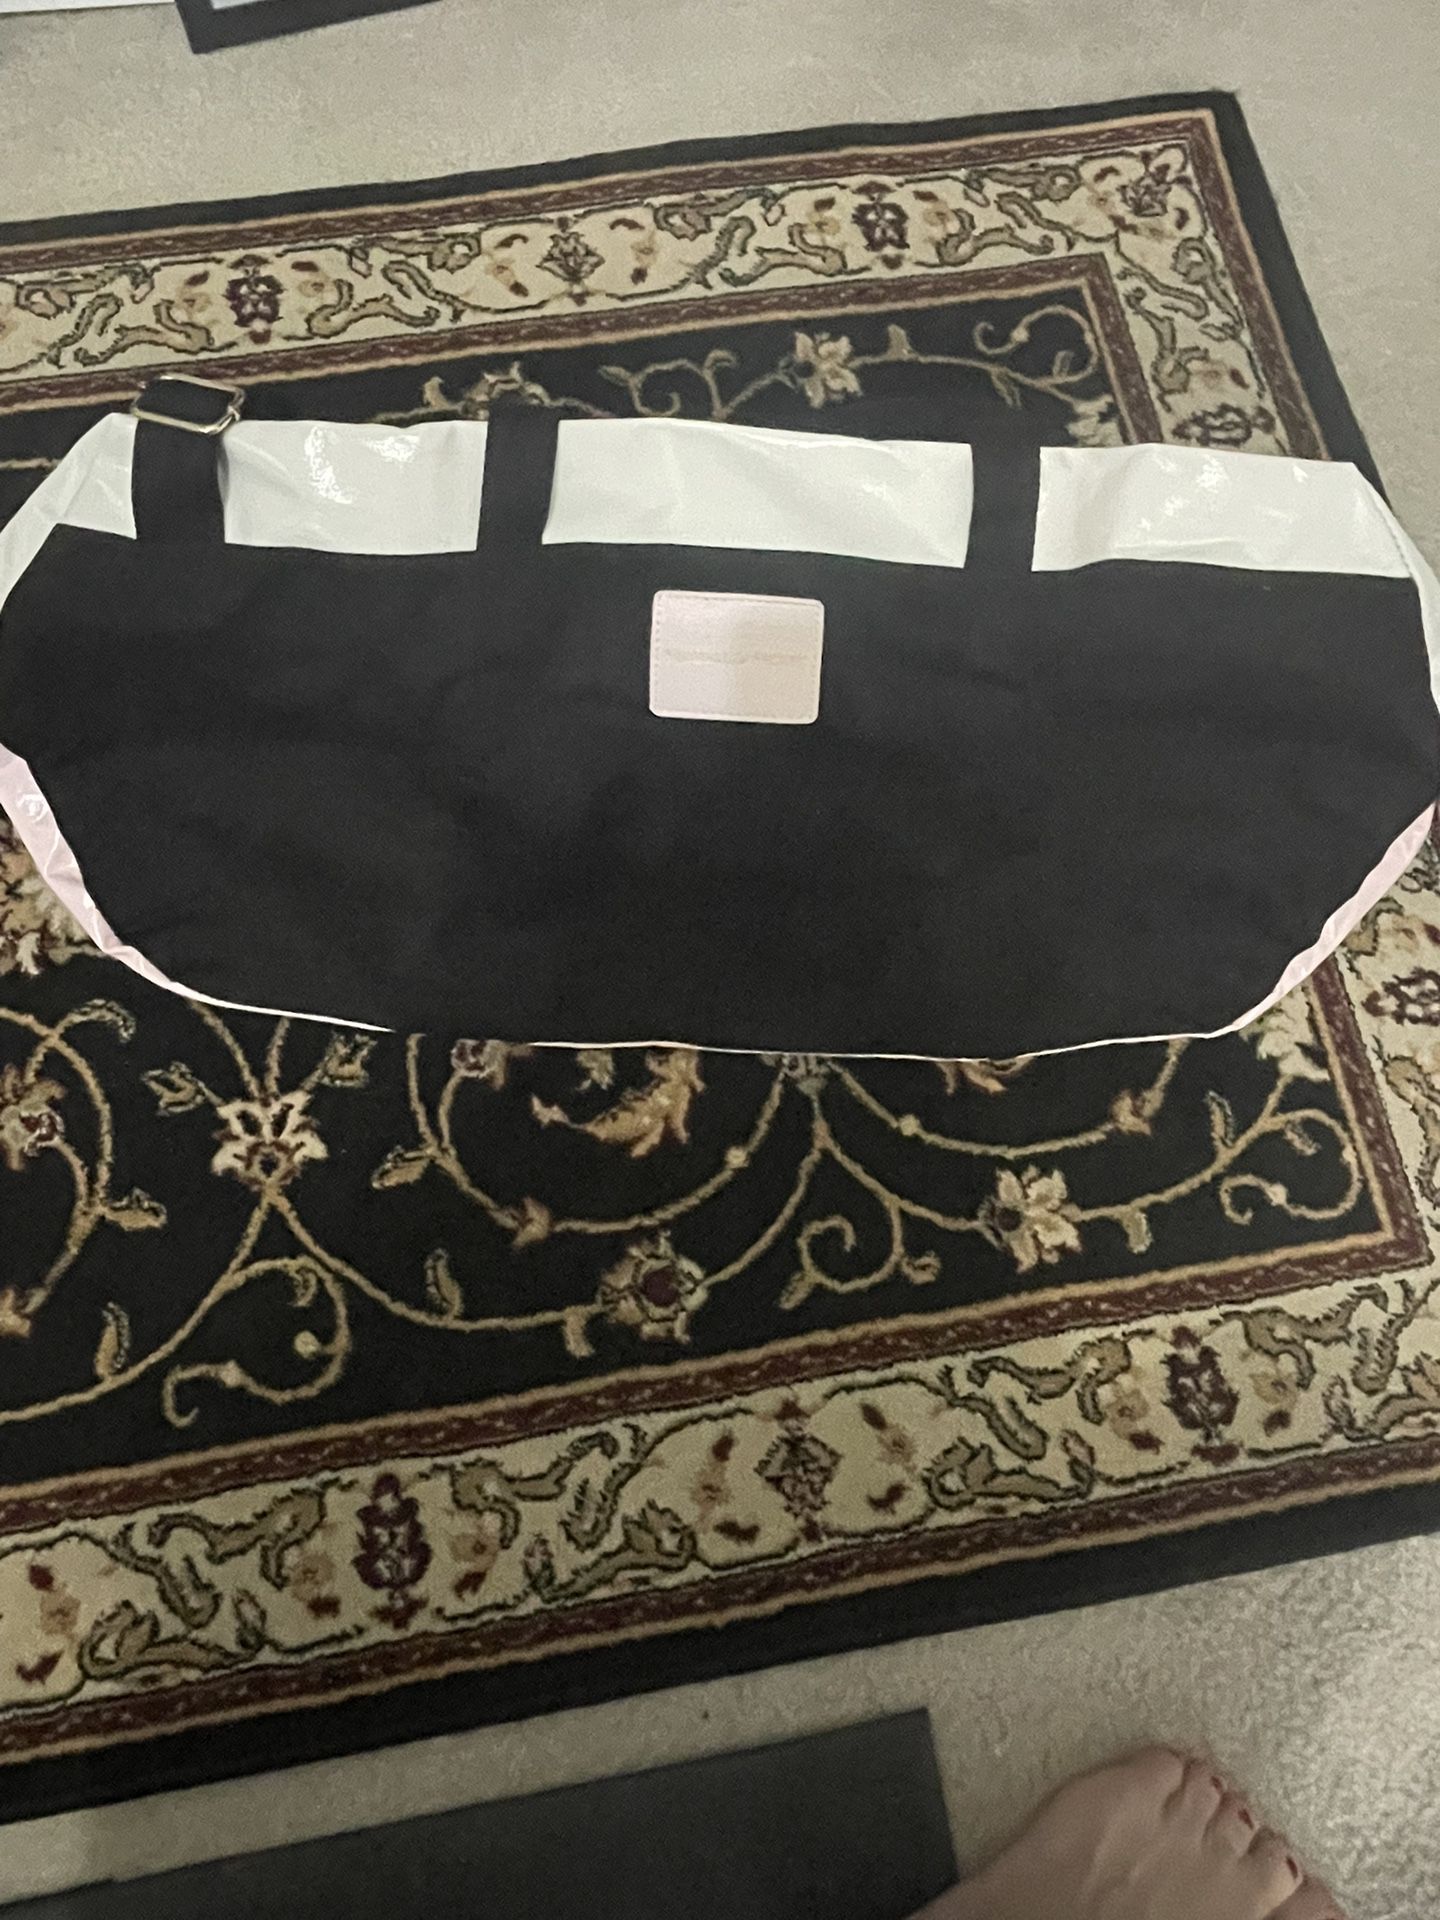 Large Tote Purse for Sale in San Antonio, TX - OfferUp